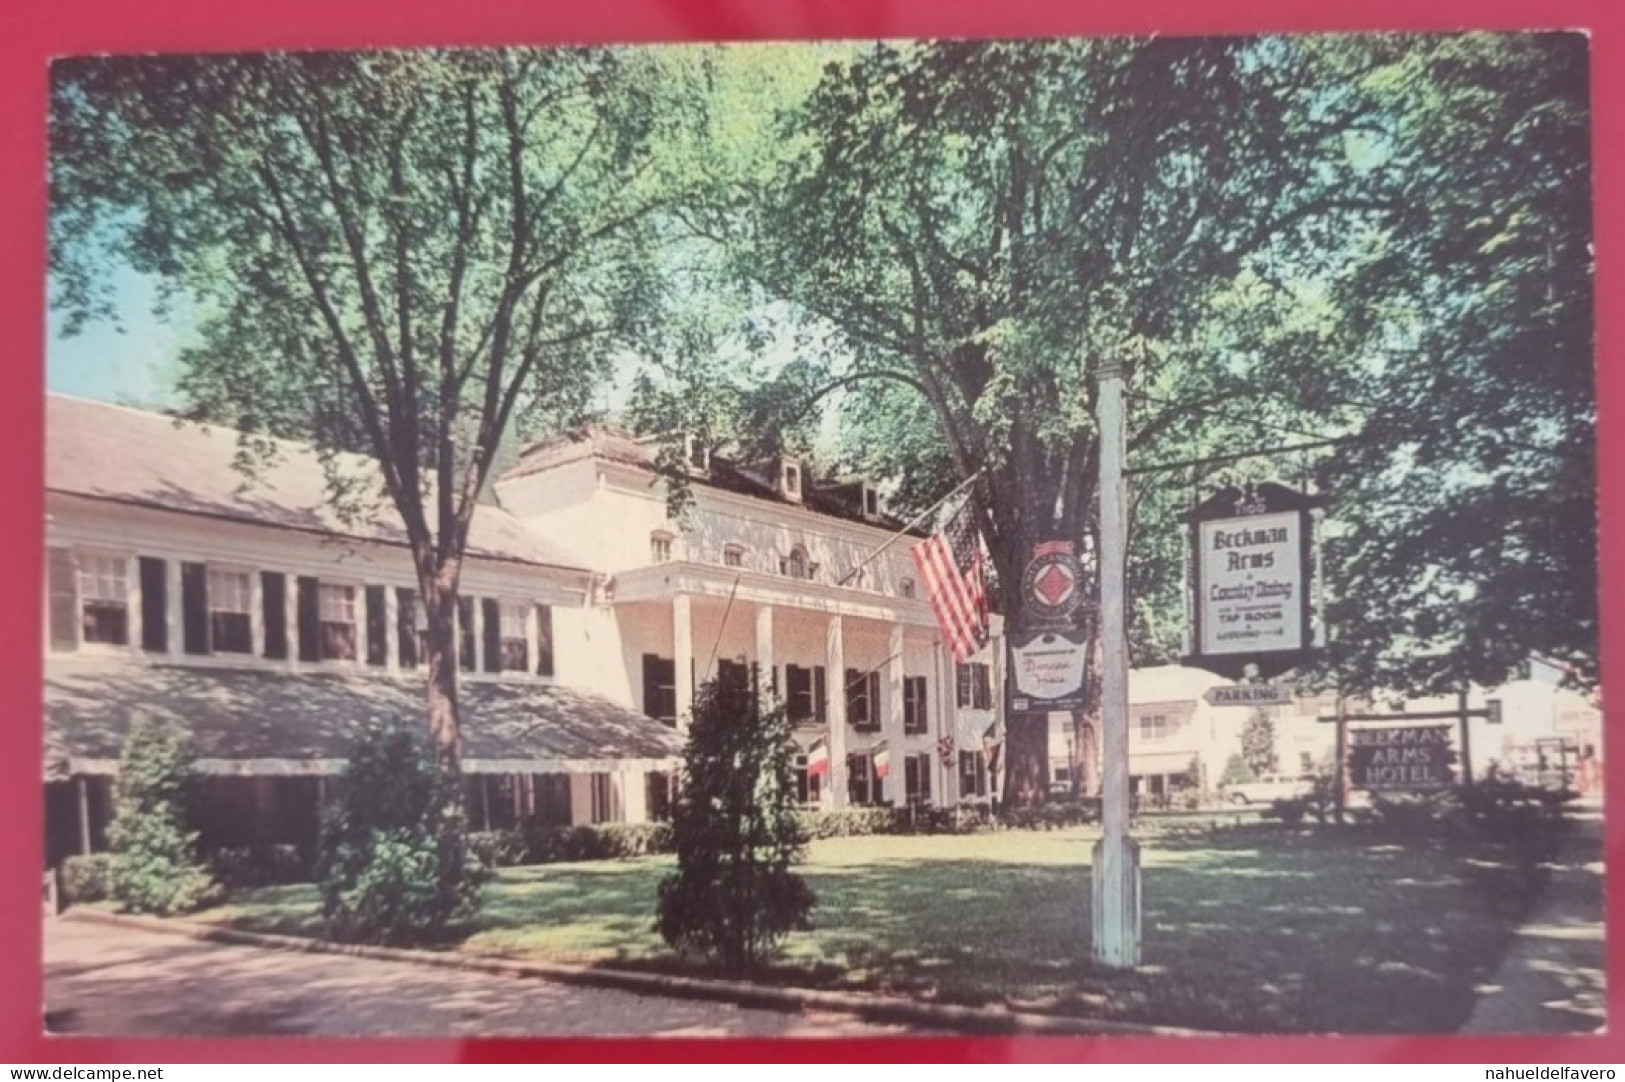 Uncirculated Postcard - USA - NY, NEW YORK - BEEKMAN ARMS, OLDEST HOTEL IN AMERICA, RHINEBECK - Cafes, Hotels & Restaurants